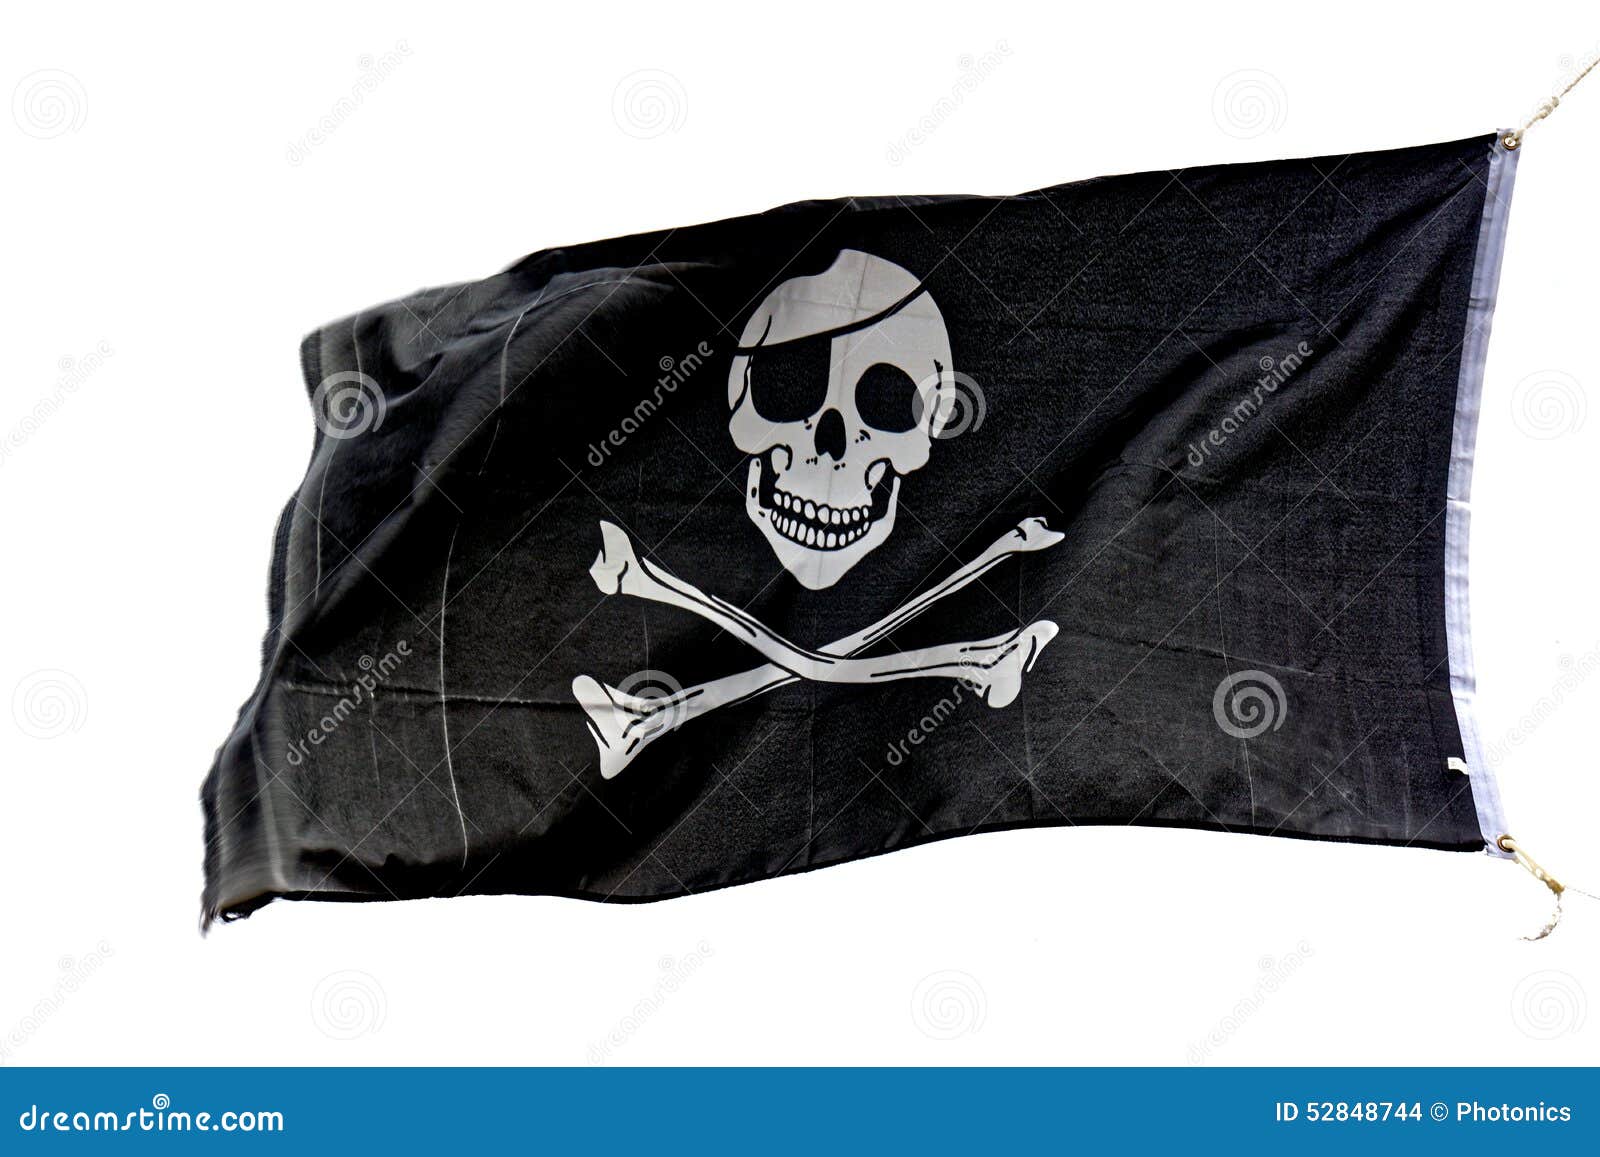 Jolly Roger Pirate Flag stock photo. Image of image 